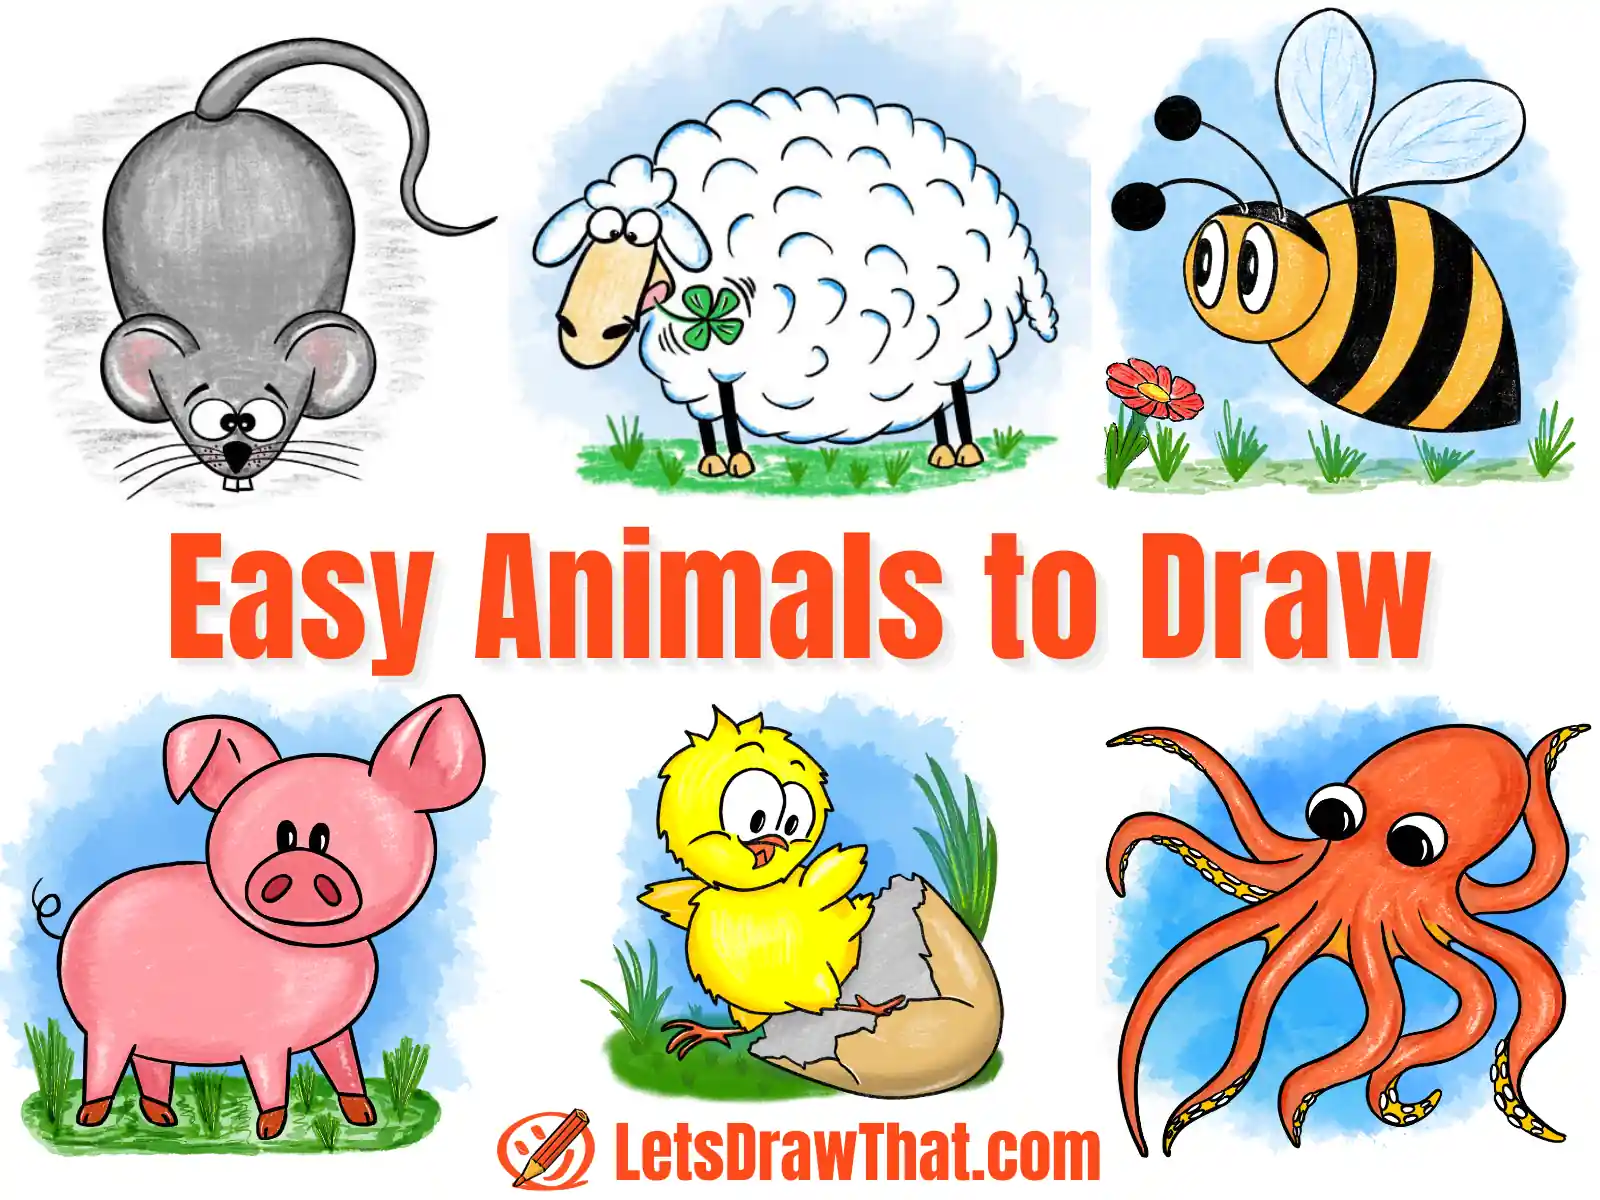 How to Draw Snoopy - Easy Drawing Art-cokhiquangminh.vn